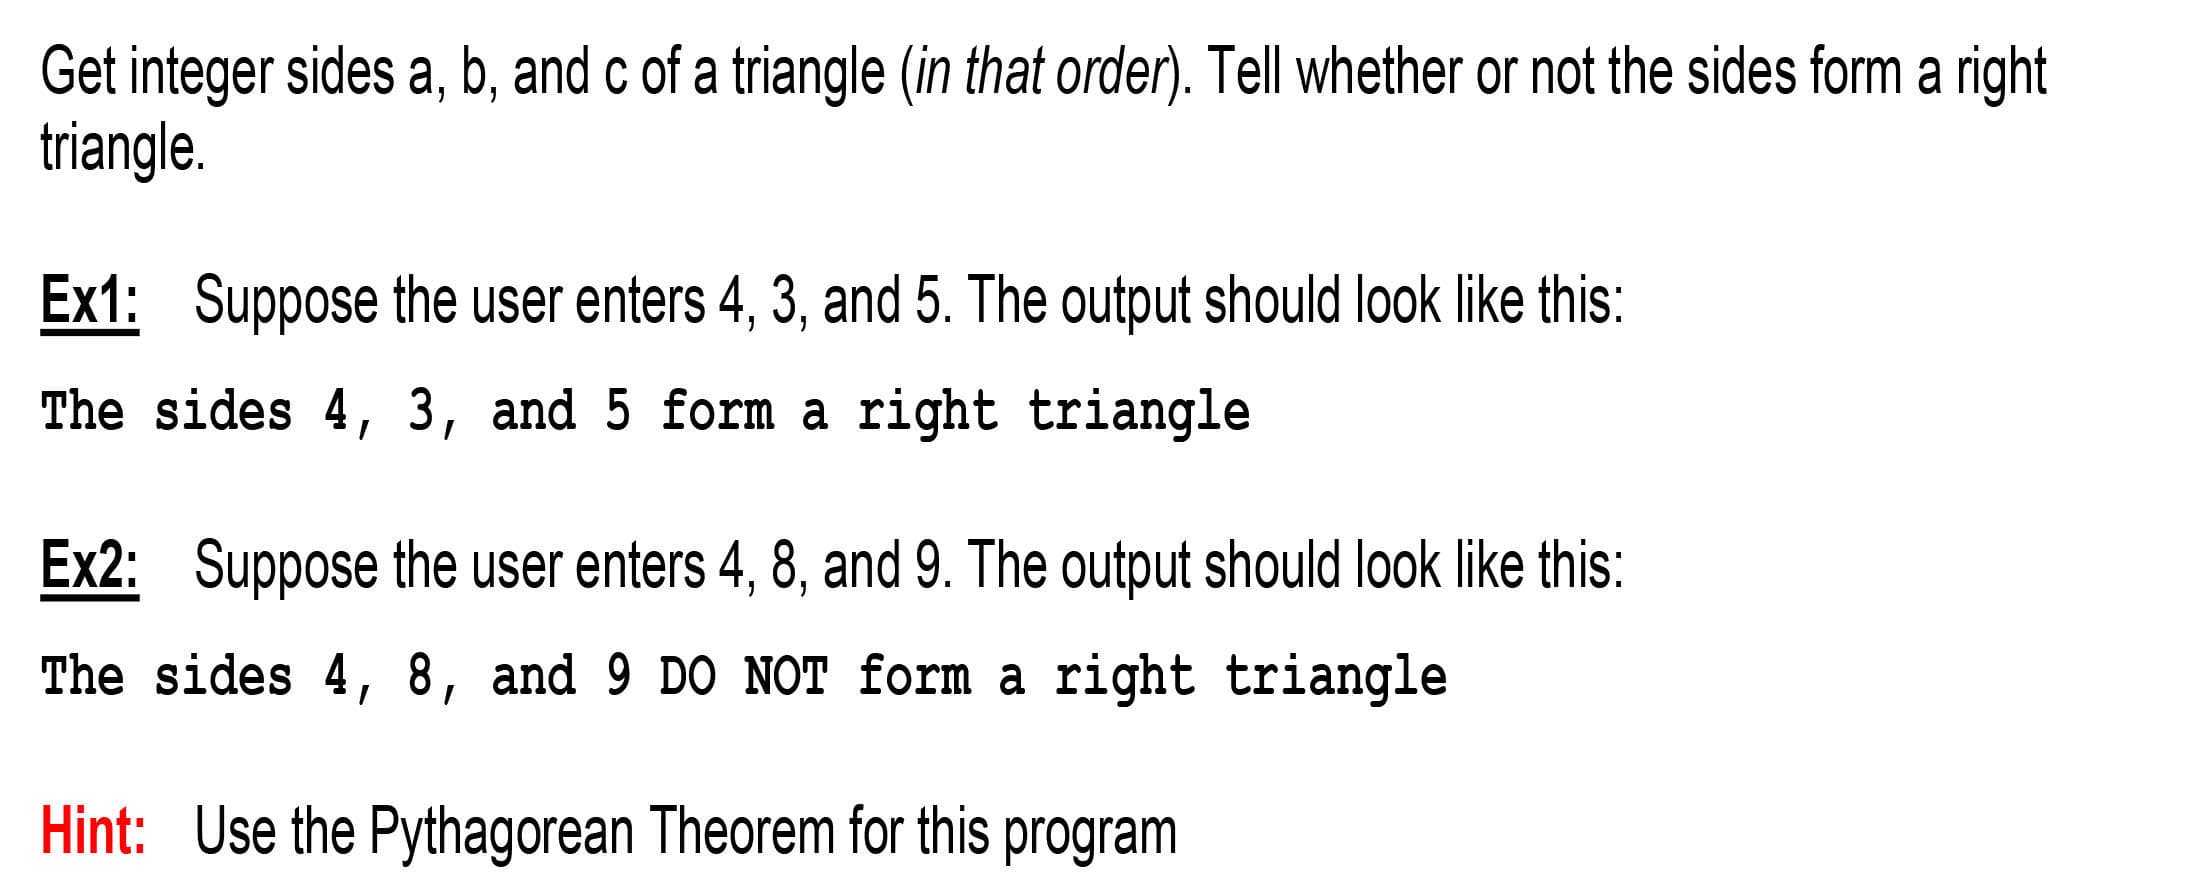 Suppose the user enters 4, 3, and 5. The output should look like this:
ides 4, 3, and 5 form a right triangle
